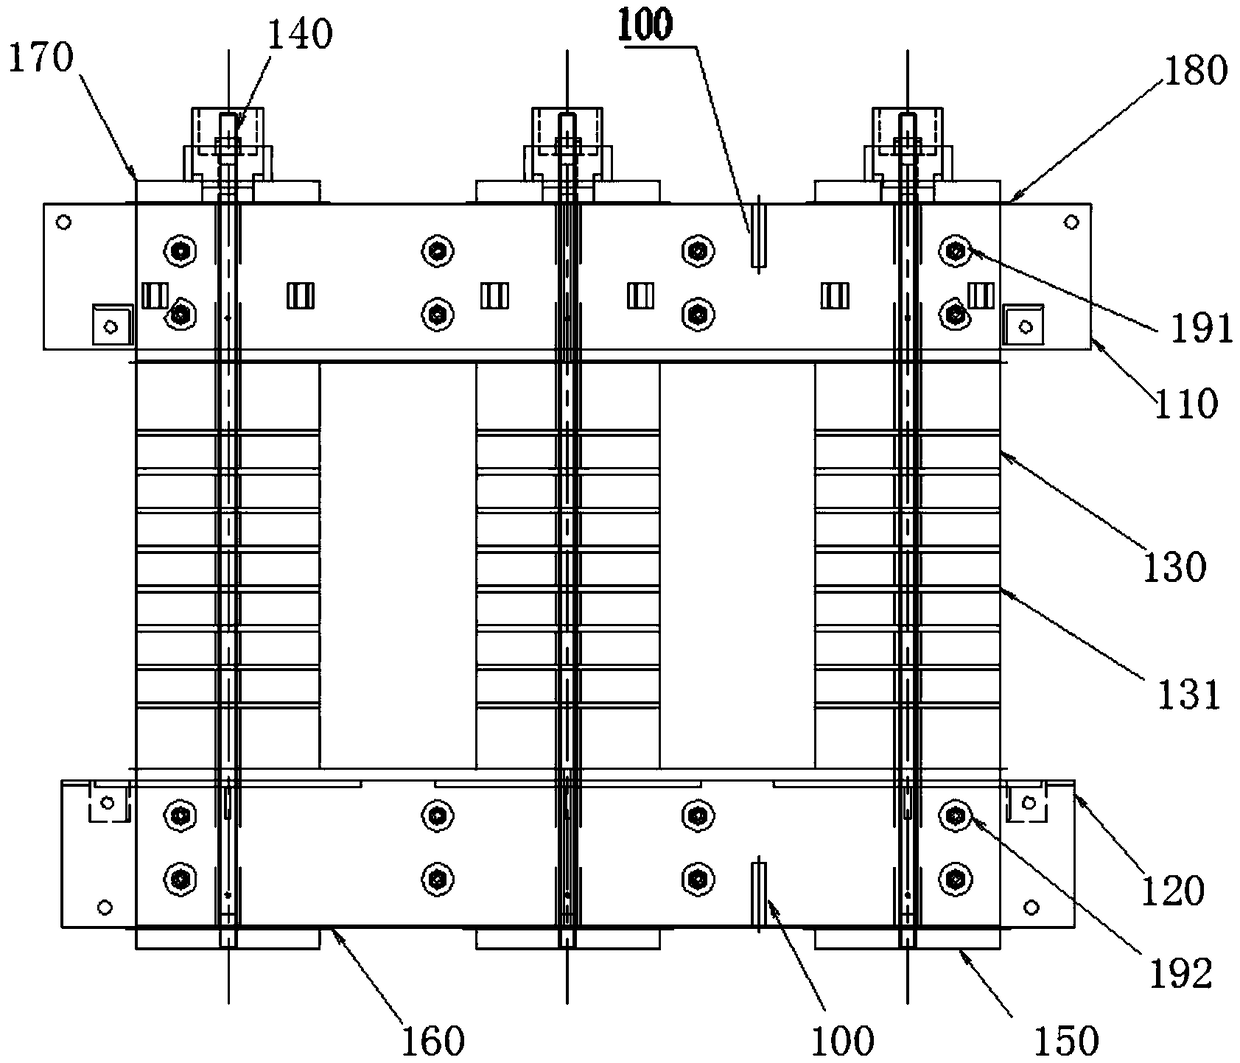 Radial iron core cake-based iron core assembly structure and reactor